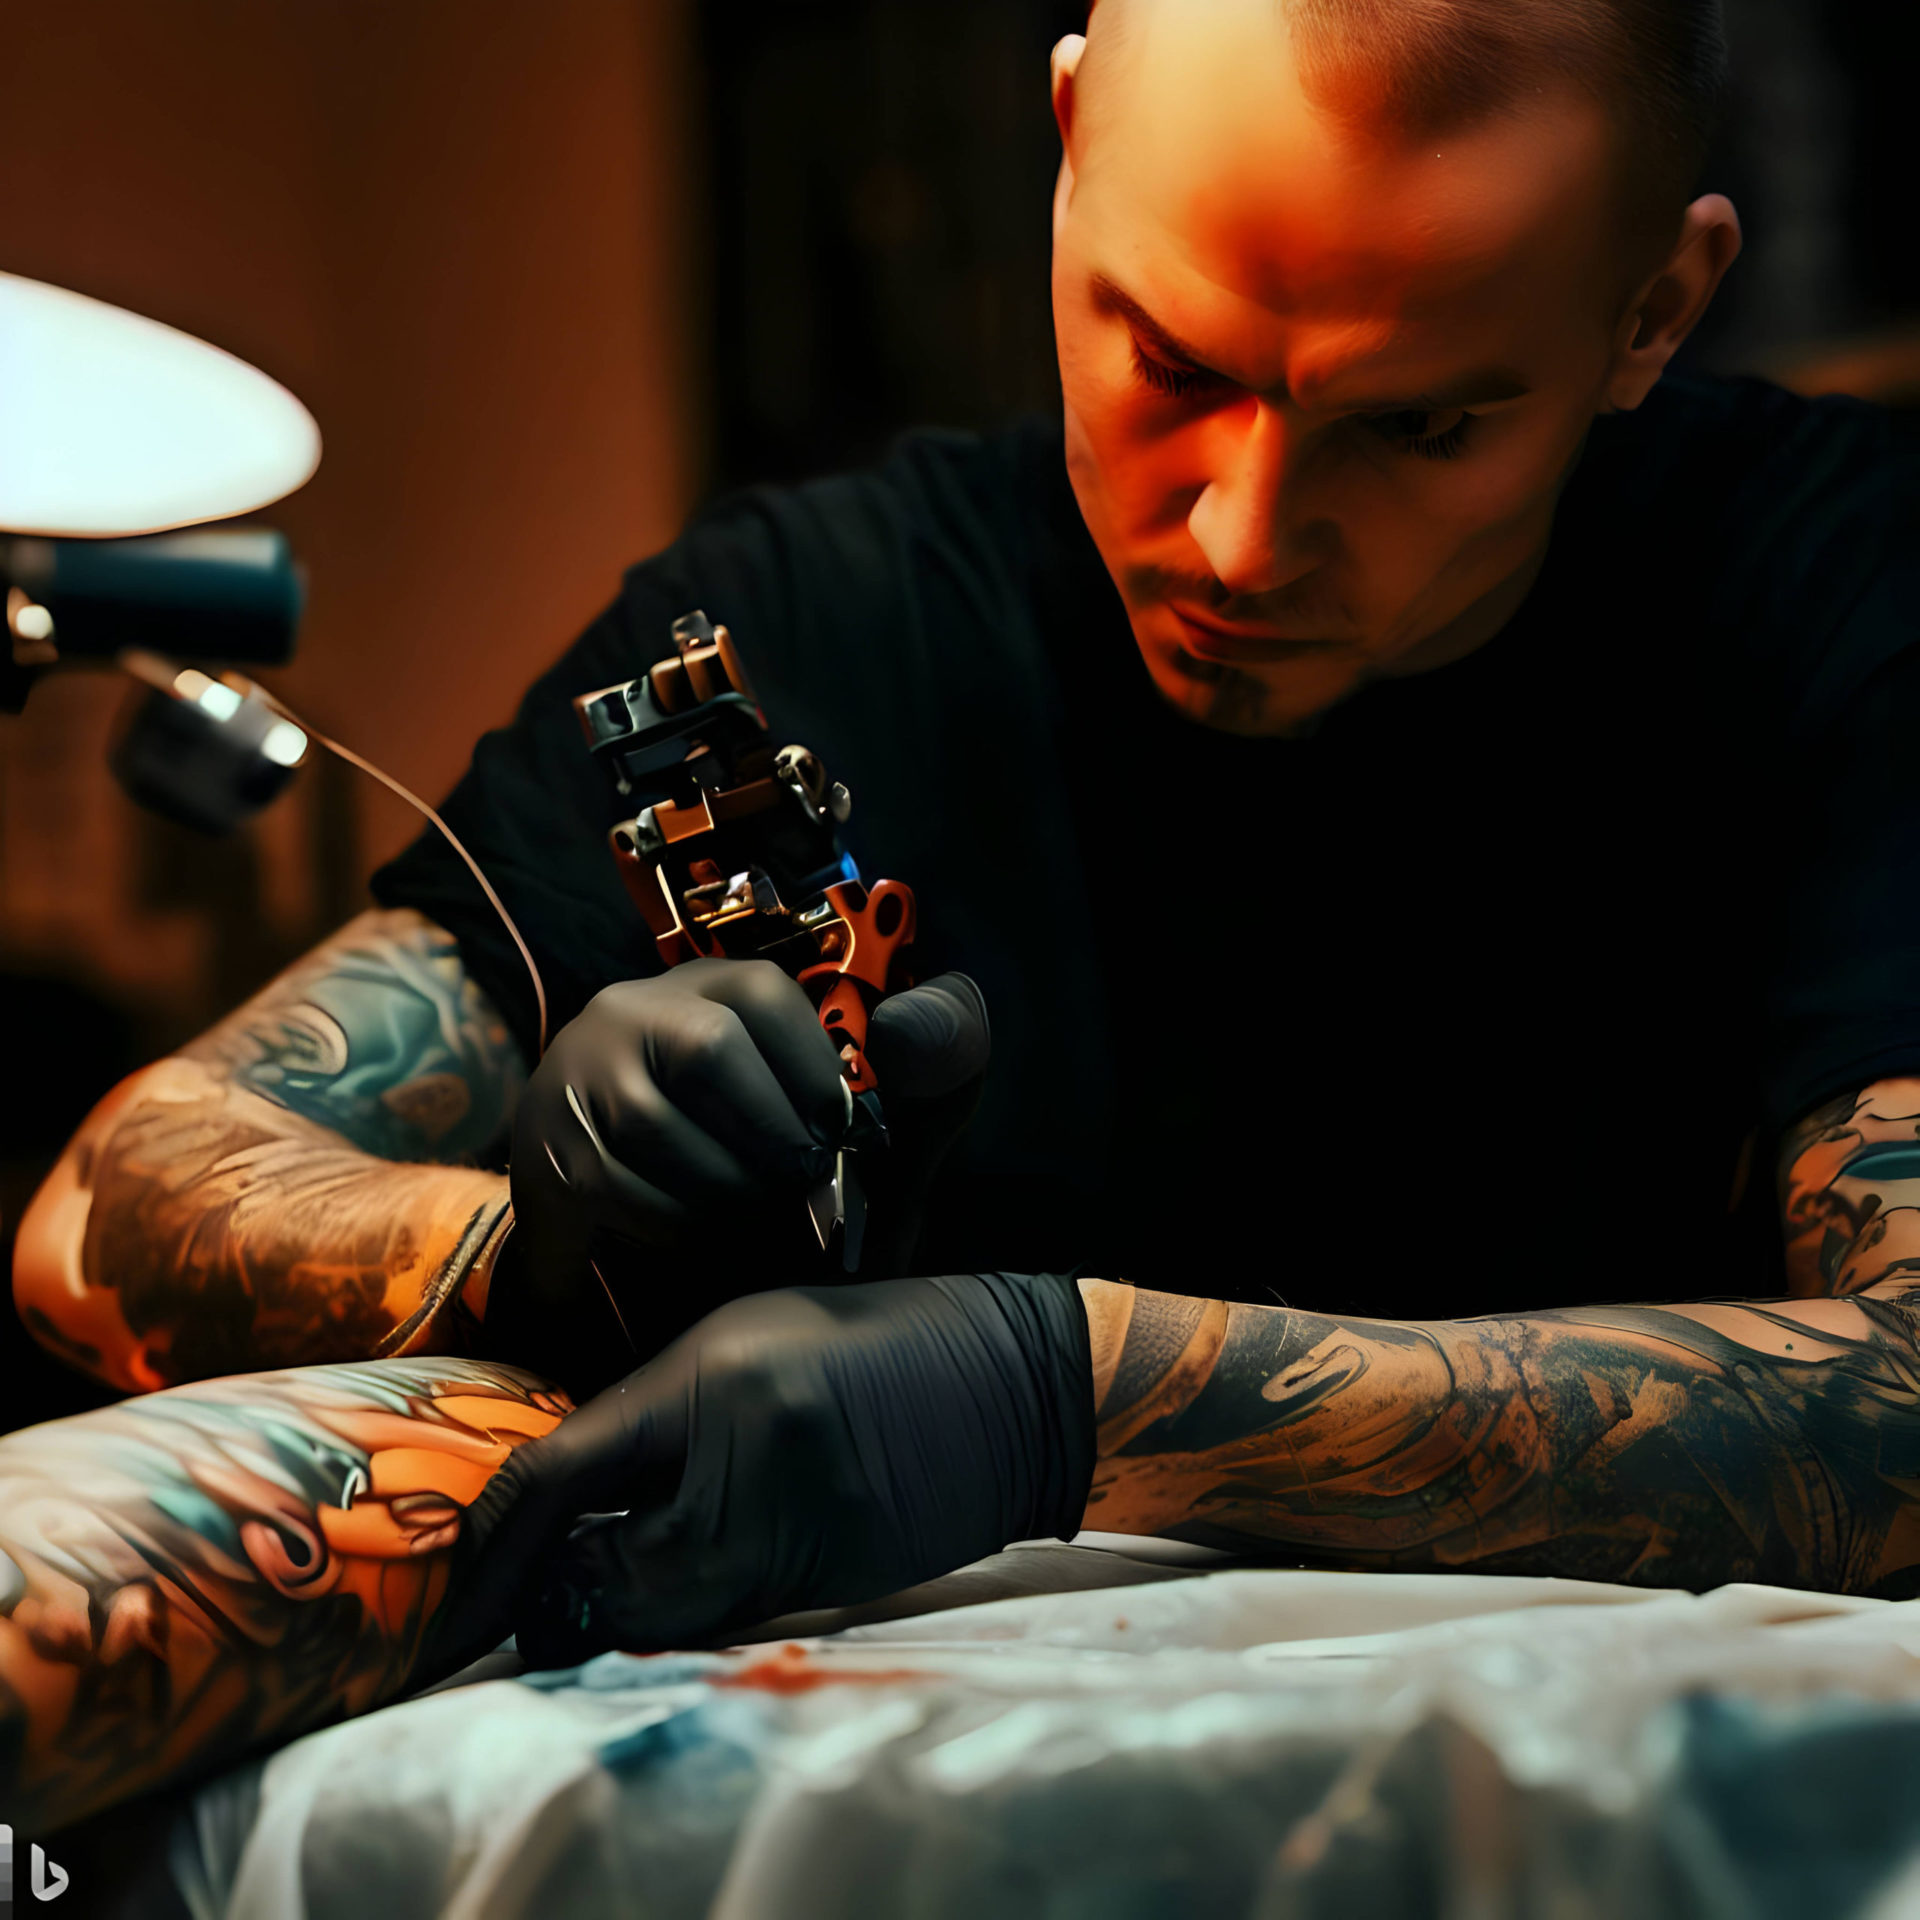 “As a professional San Judas Tattoo artist, I bring your visions to life with ink.”